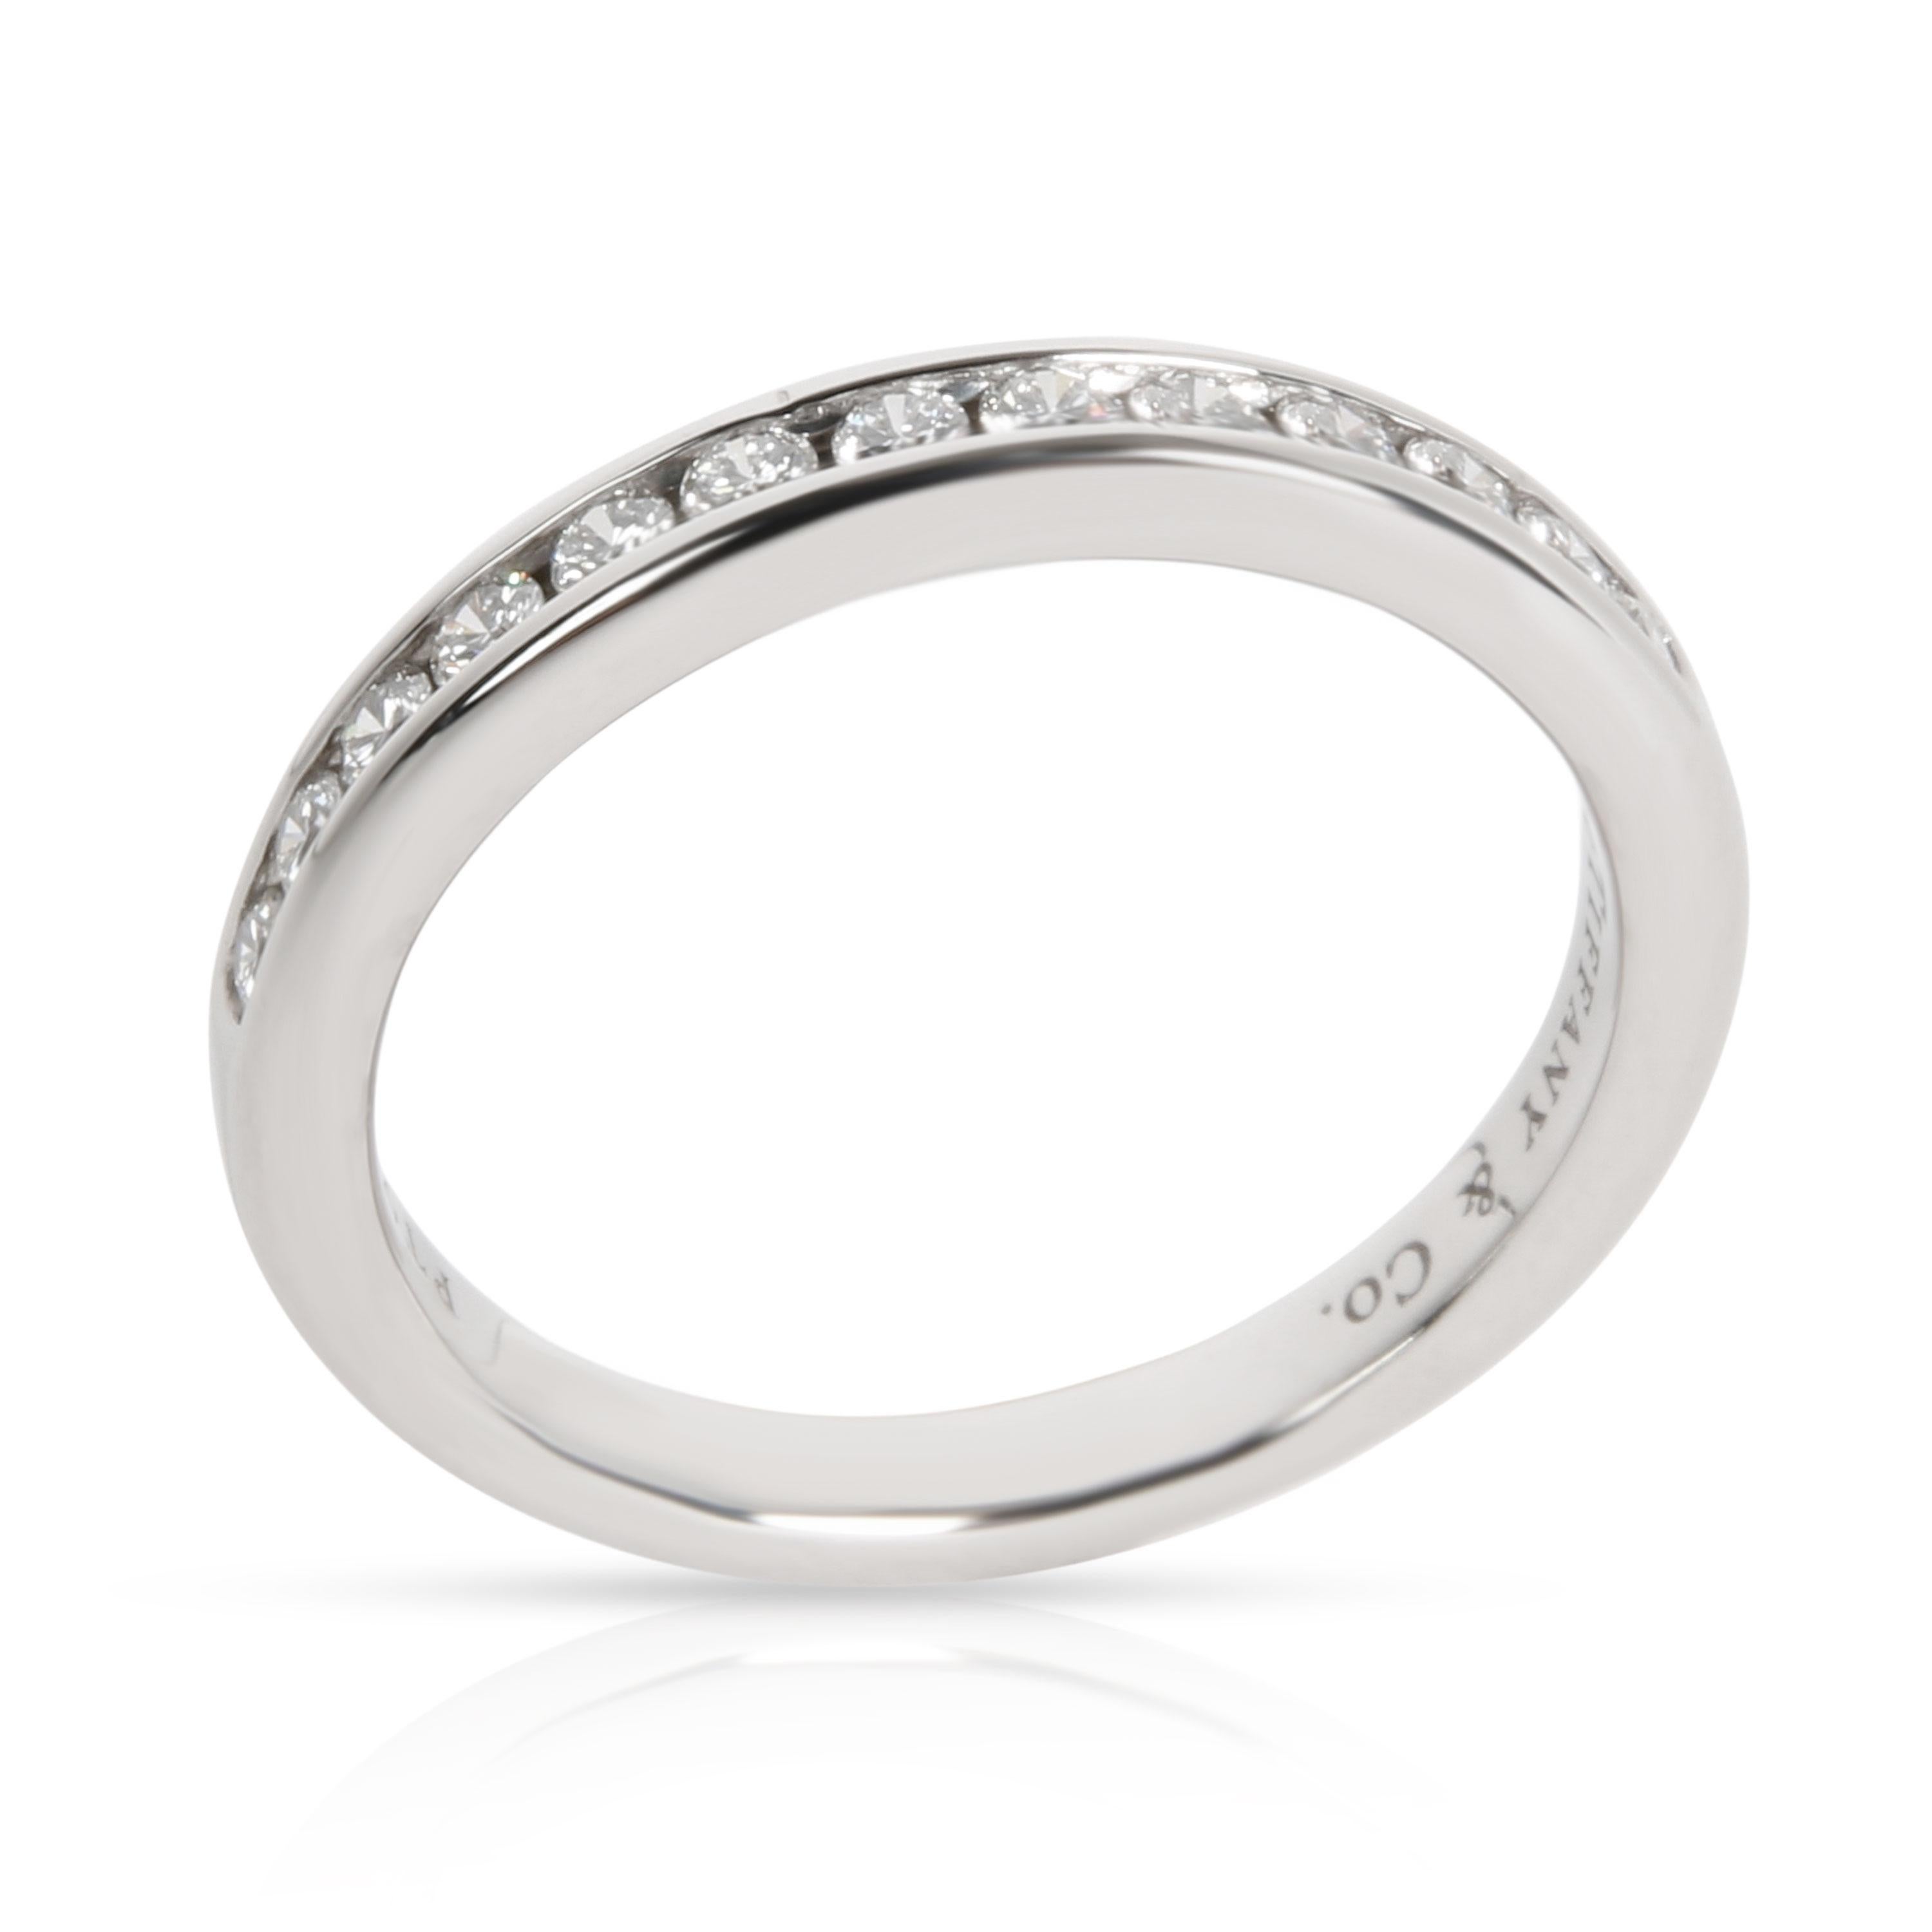 Tiffany & Co. Channel Set Diamond Wedding Band in Platinum 0.24 CTW

PRIMARY DETAILS
SKU: 103581
Listing Title: Tiffany & Co. Channel Set Diamond Wedding Band in Platinum 0.24 CTW
Condition Description: Retails for 2875 USD. In excellent condition